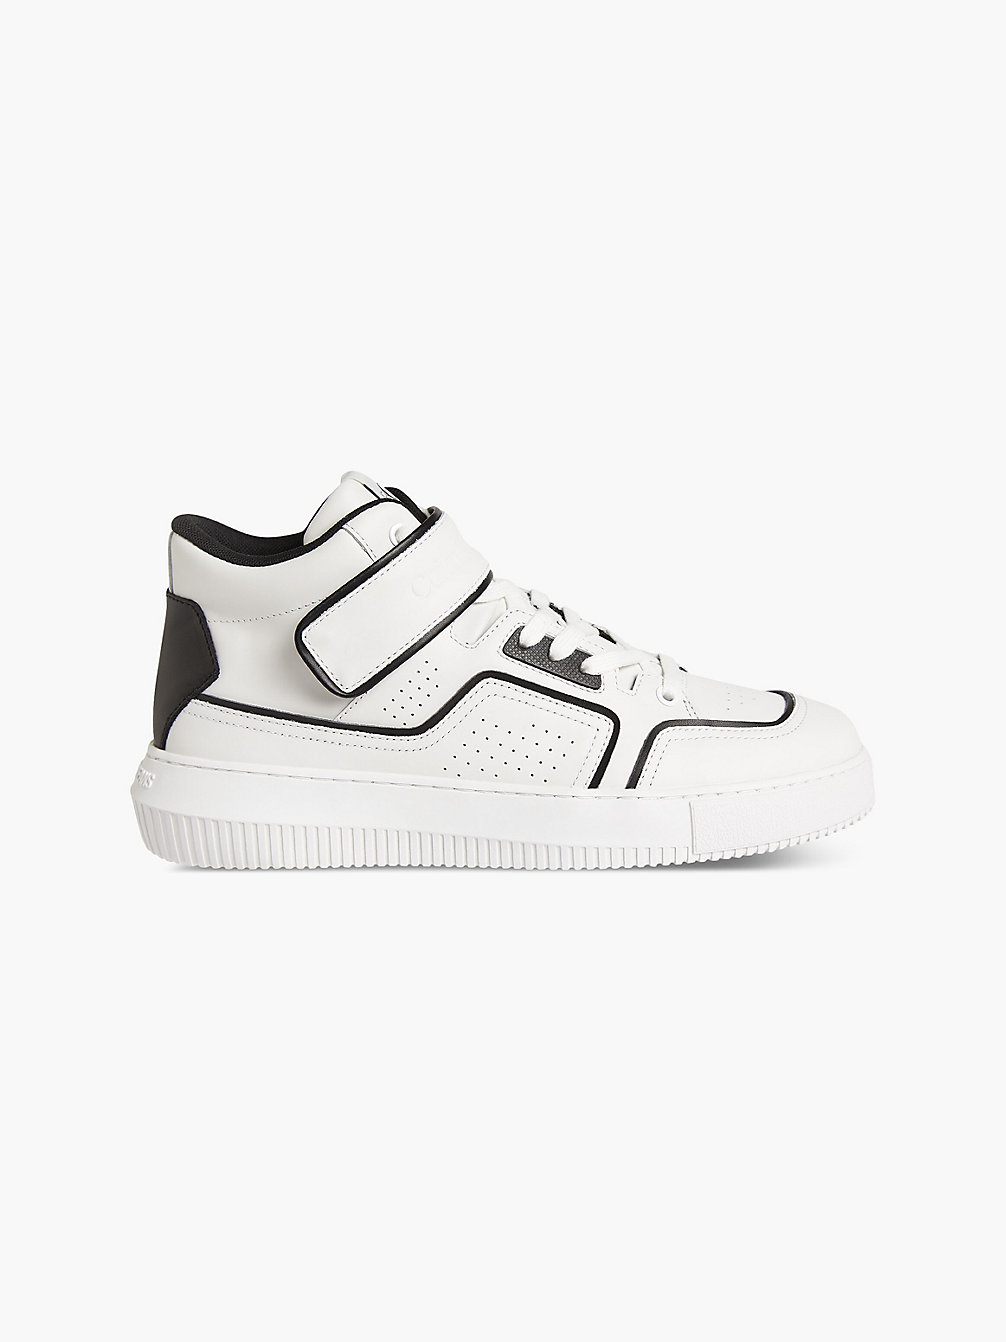 WHITE / BLACK Leather High-Top Trainers undefined men Calvin Klein